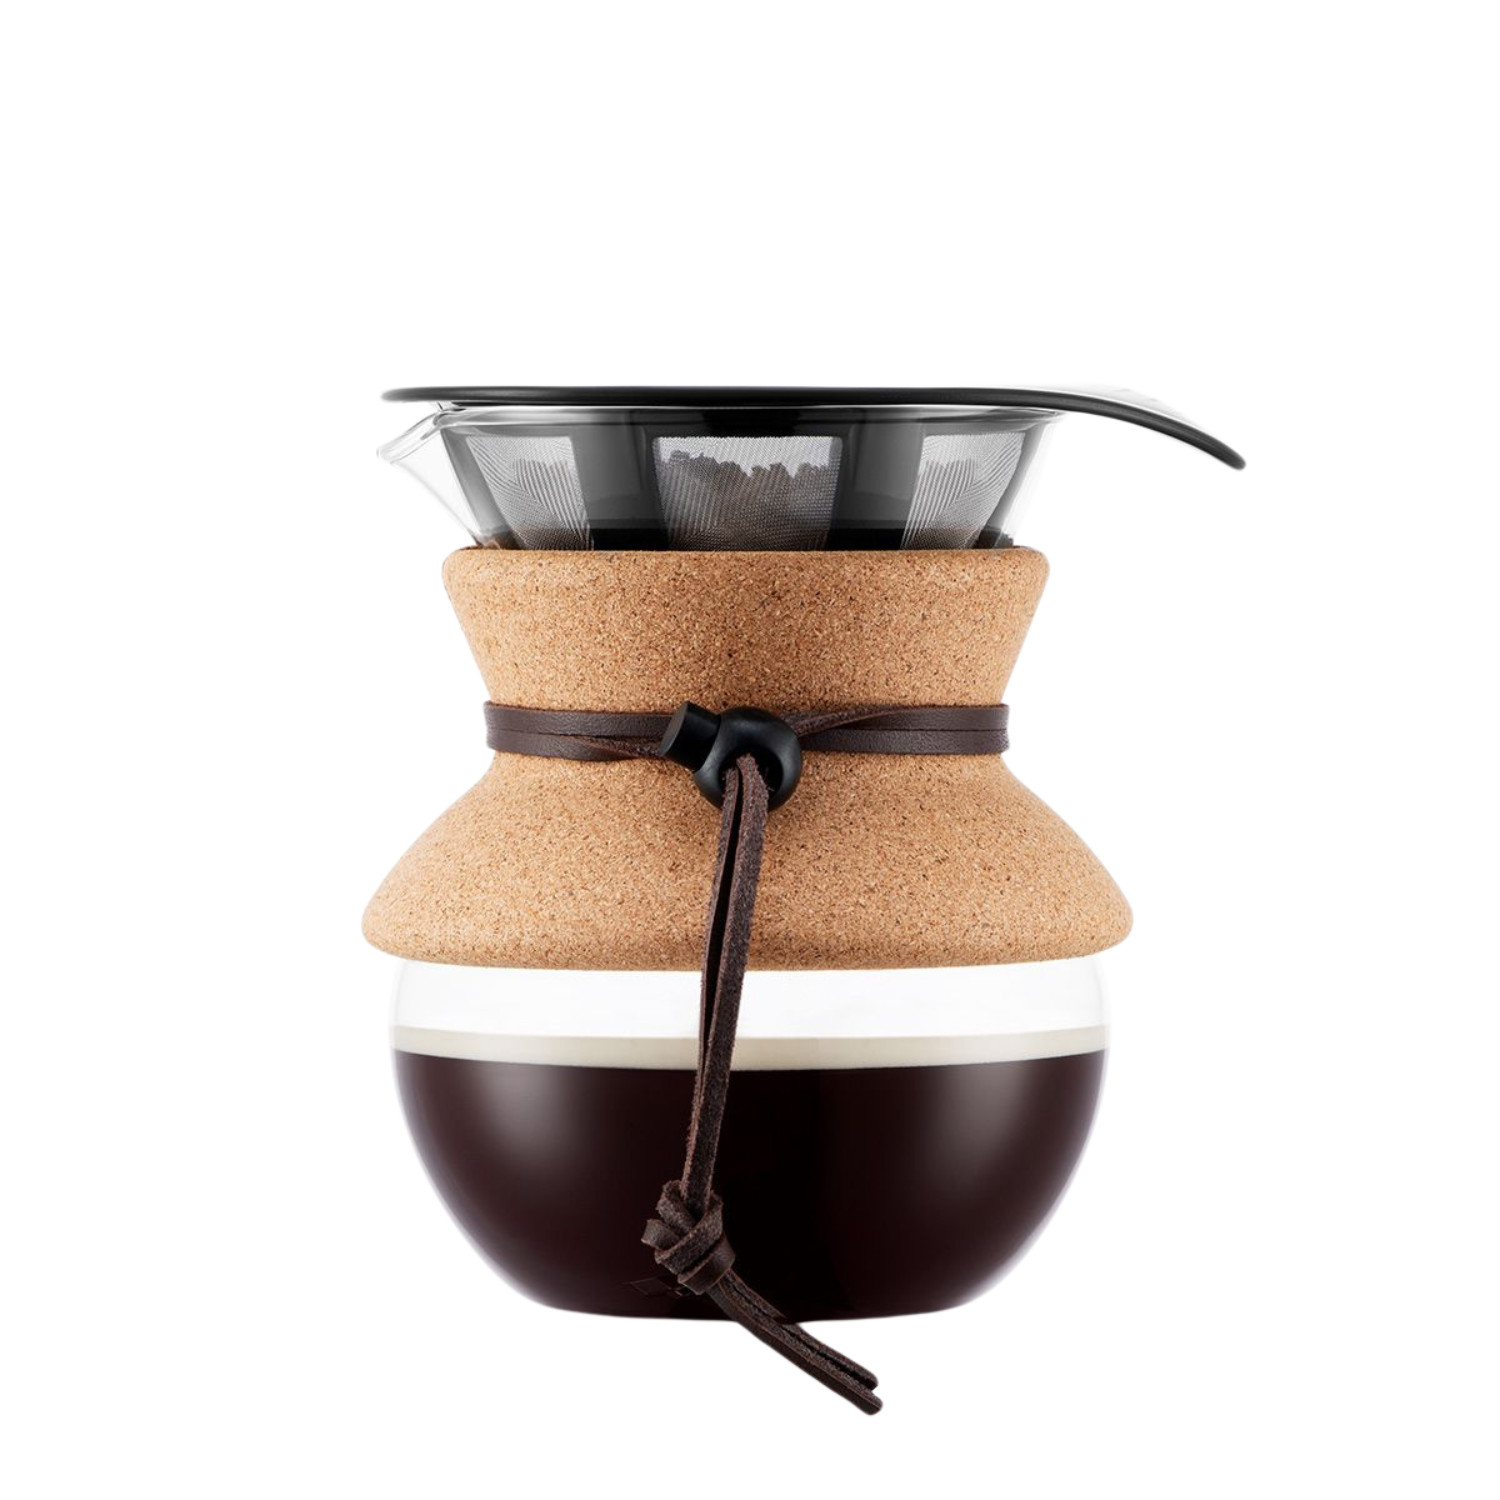 Bodum pourover filled with coffee